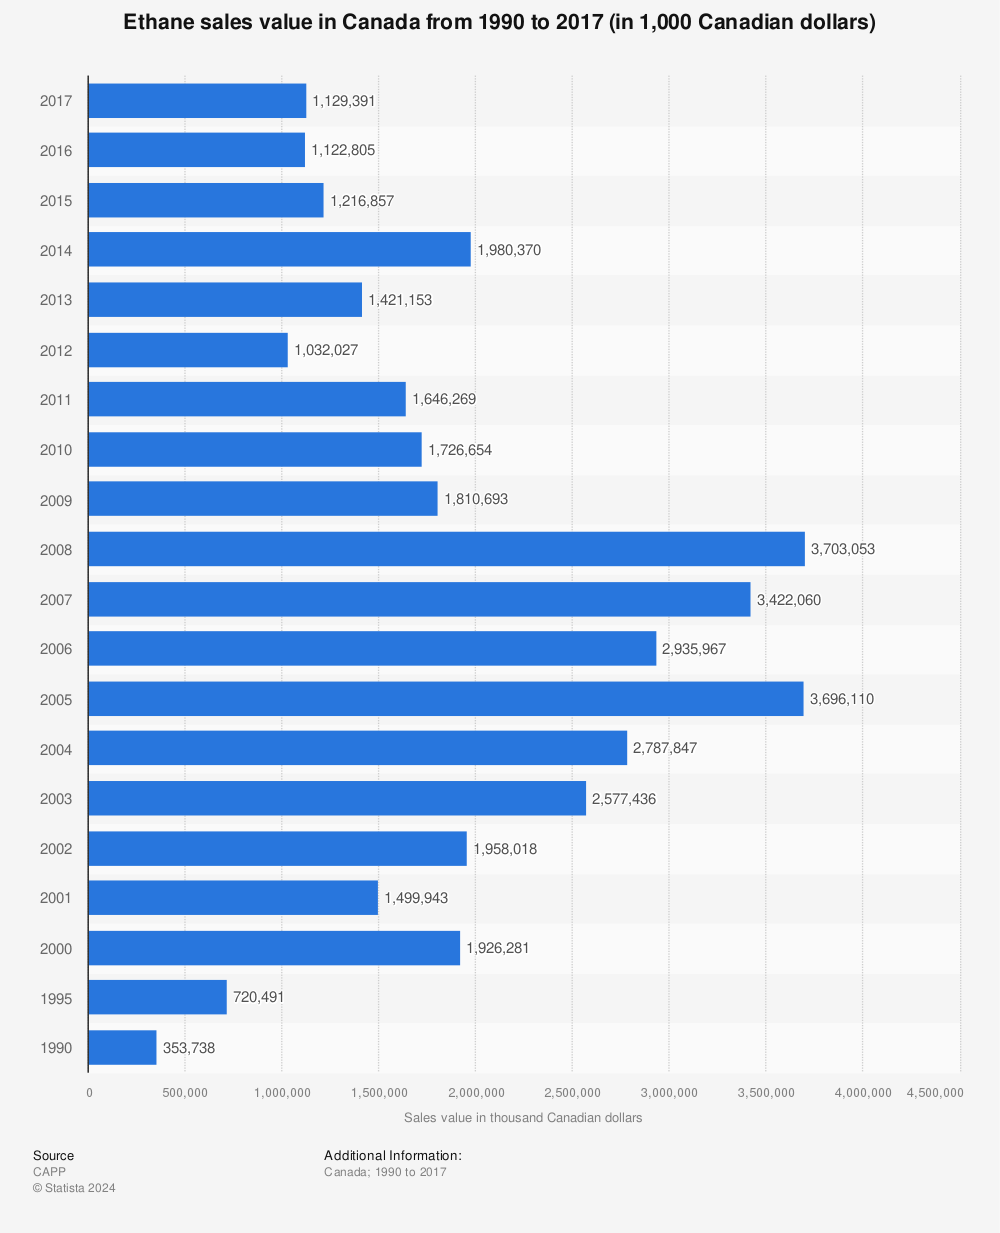 Statistic: Ethane sales value in Canada from 1990 to 2017 (in 1,000 Canadian dollars) | Statista